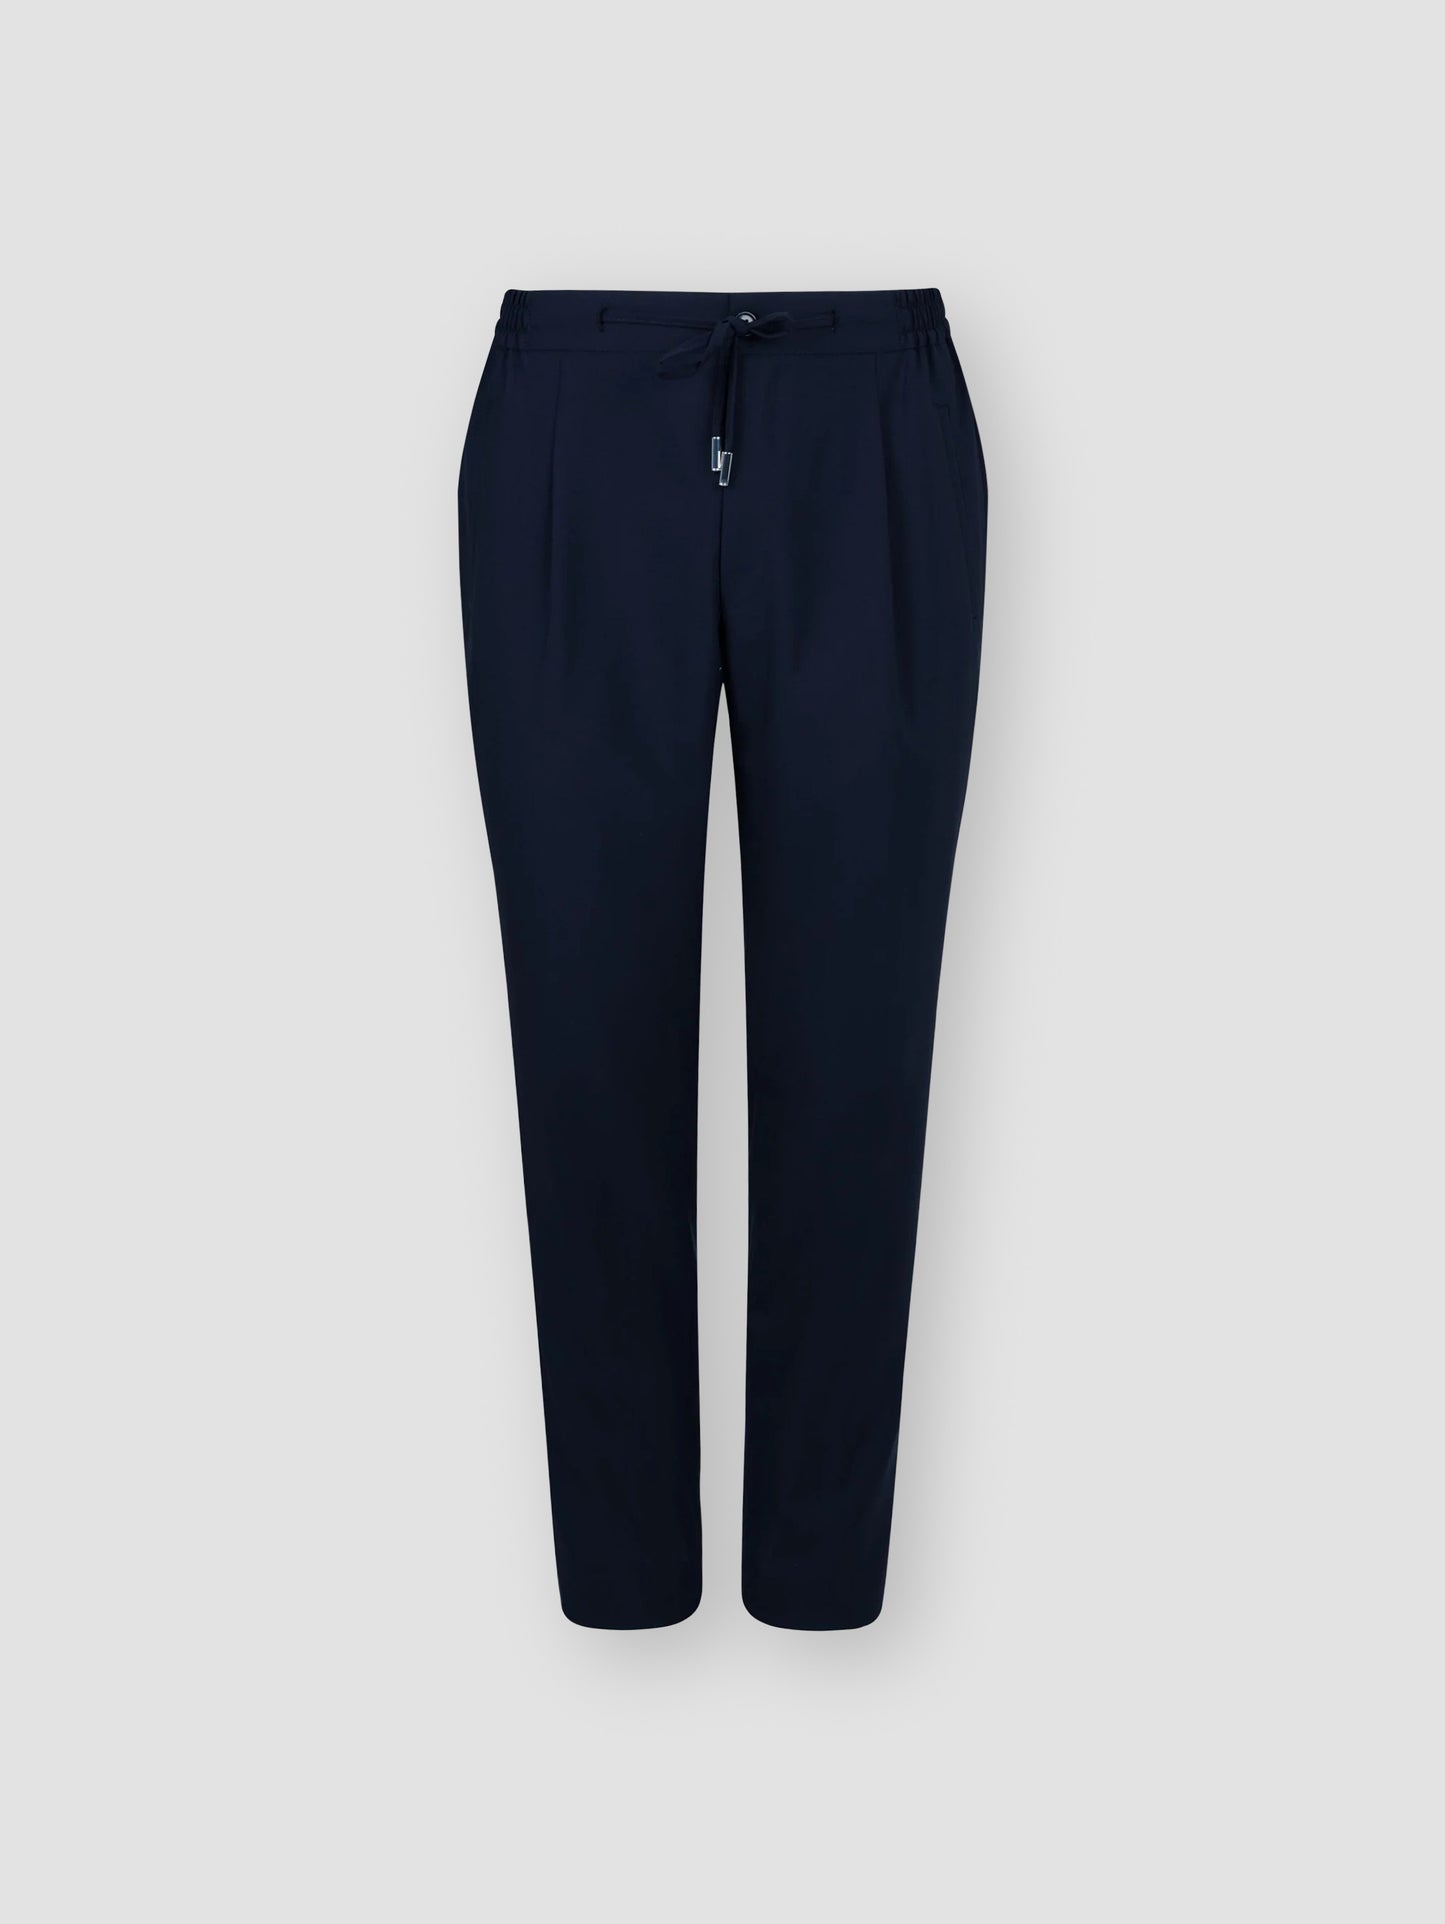 Wool Twill Drawstring Trousers Navy Product